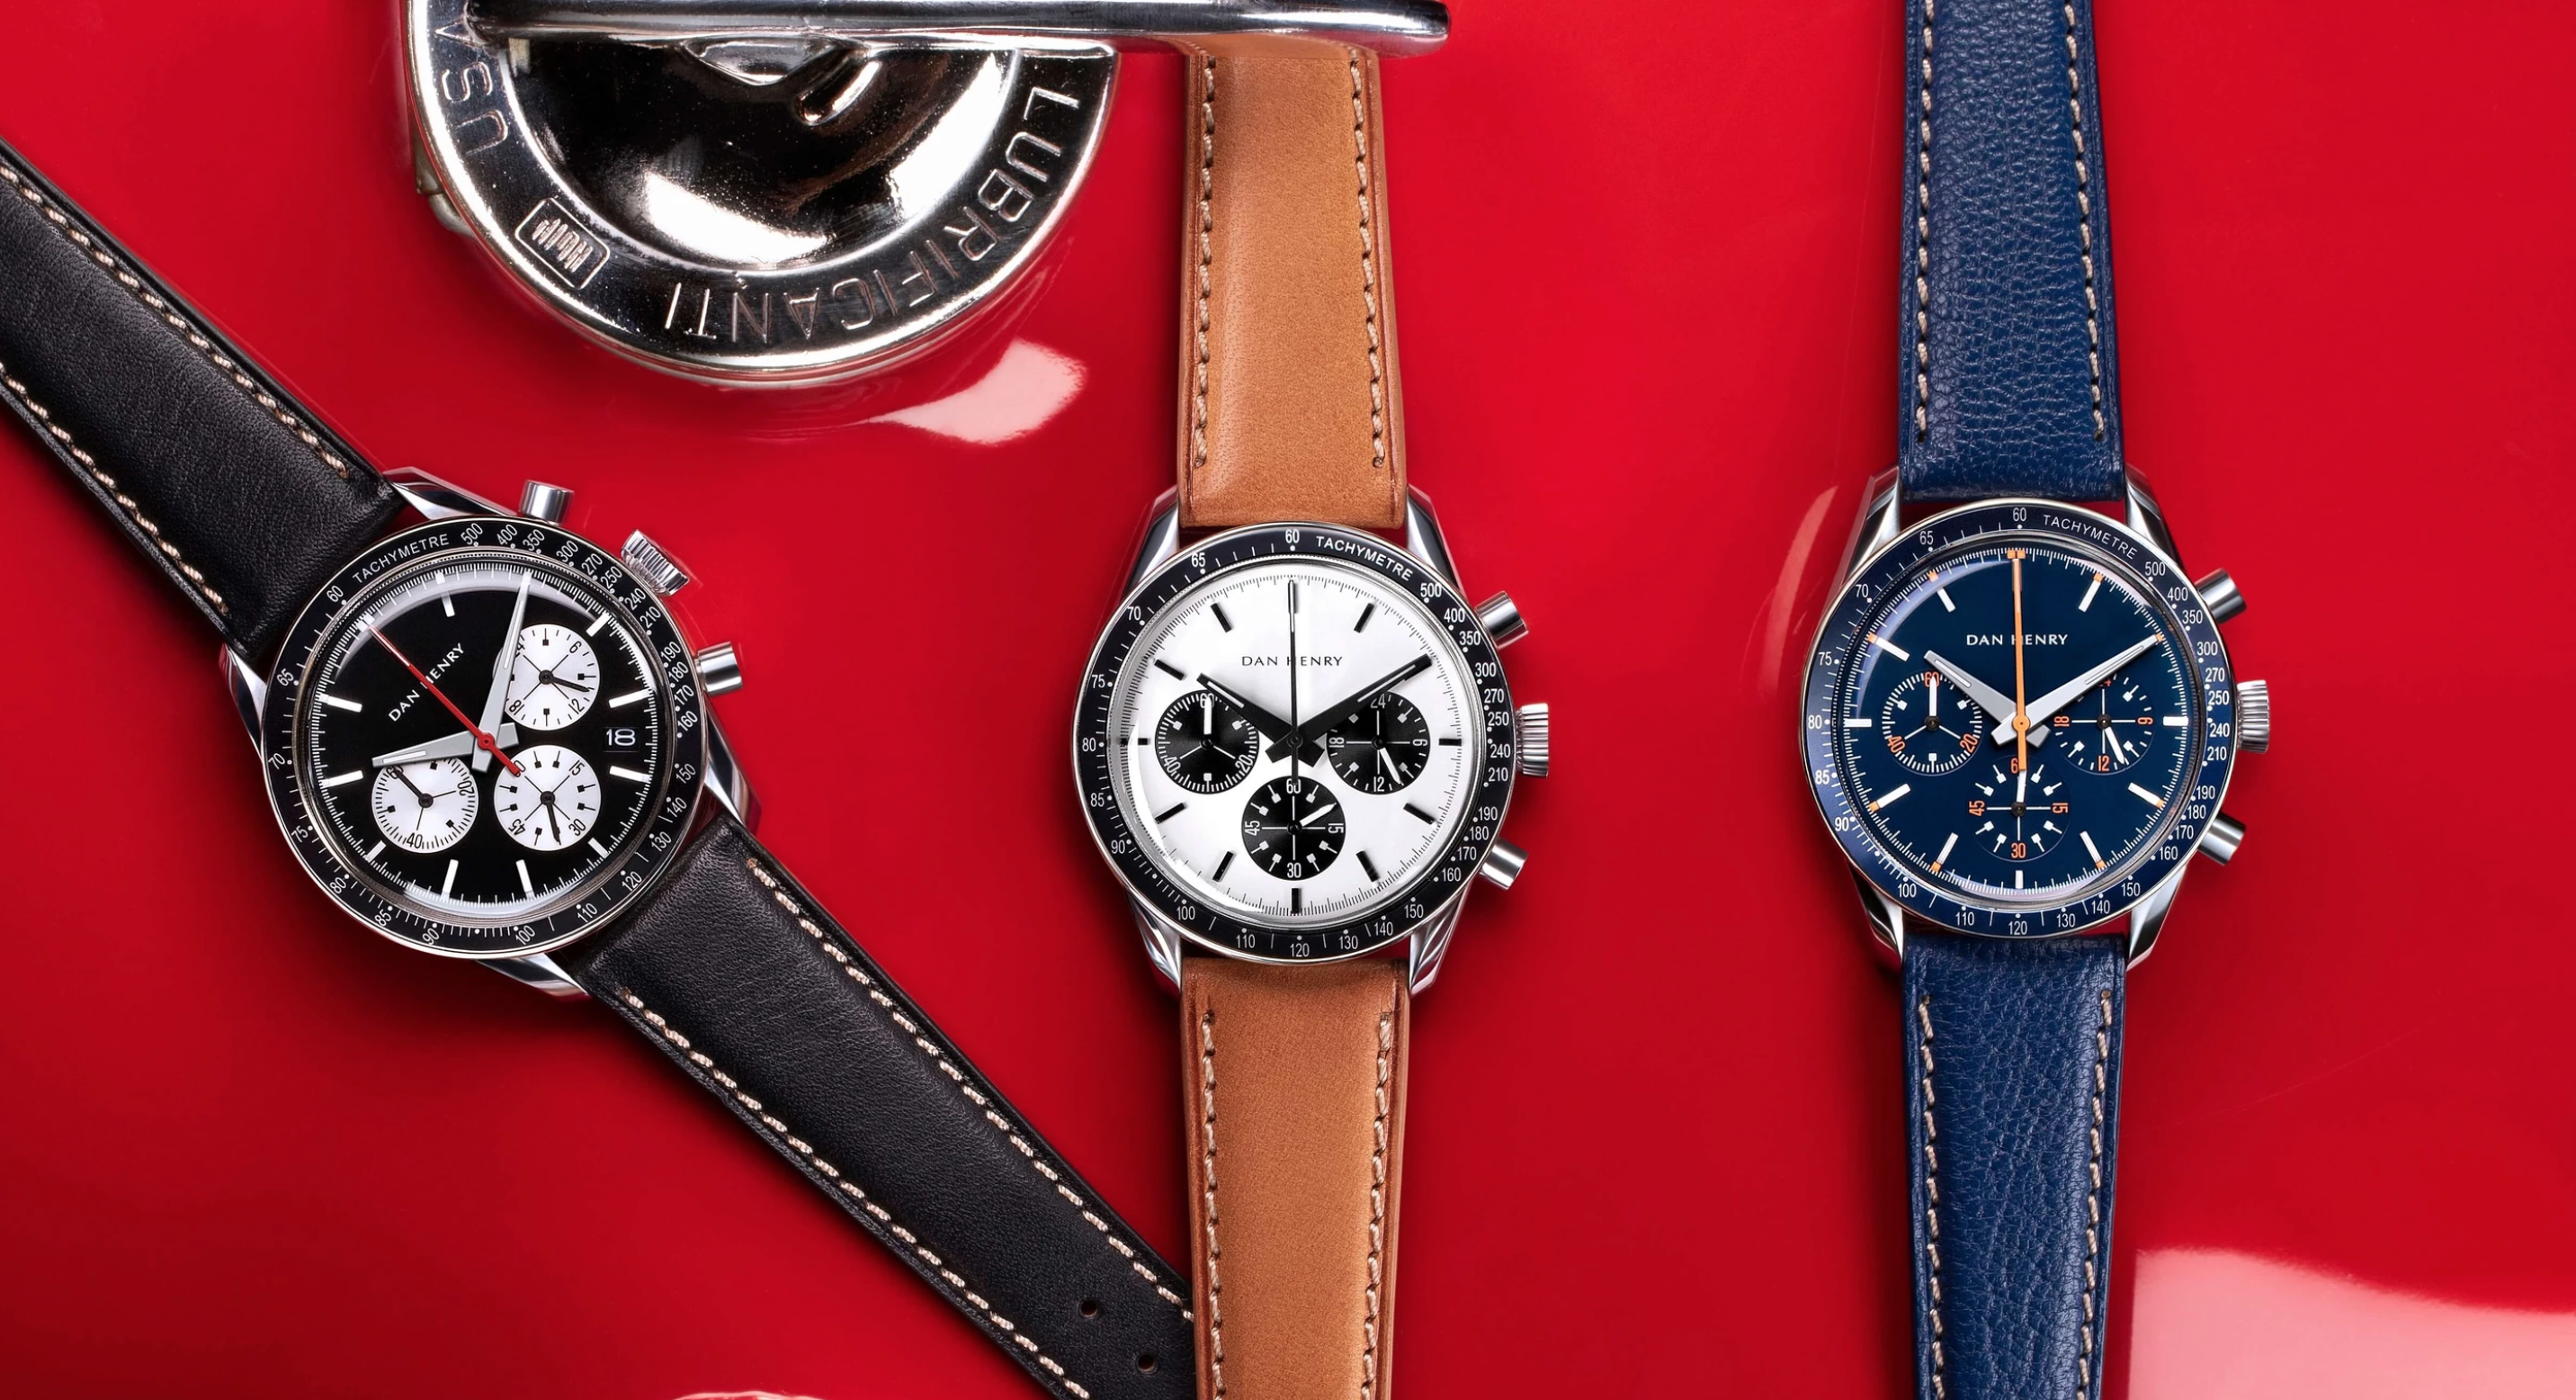 3 top chronographs for under a grand